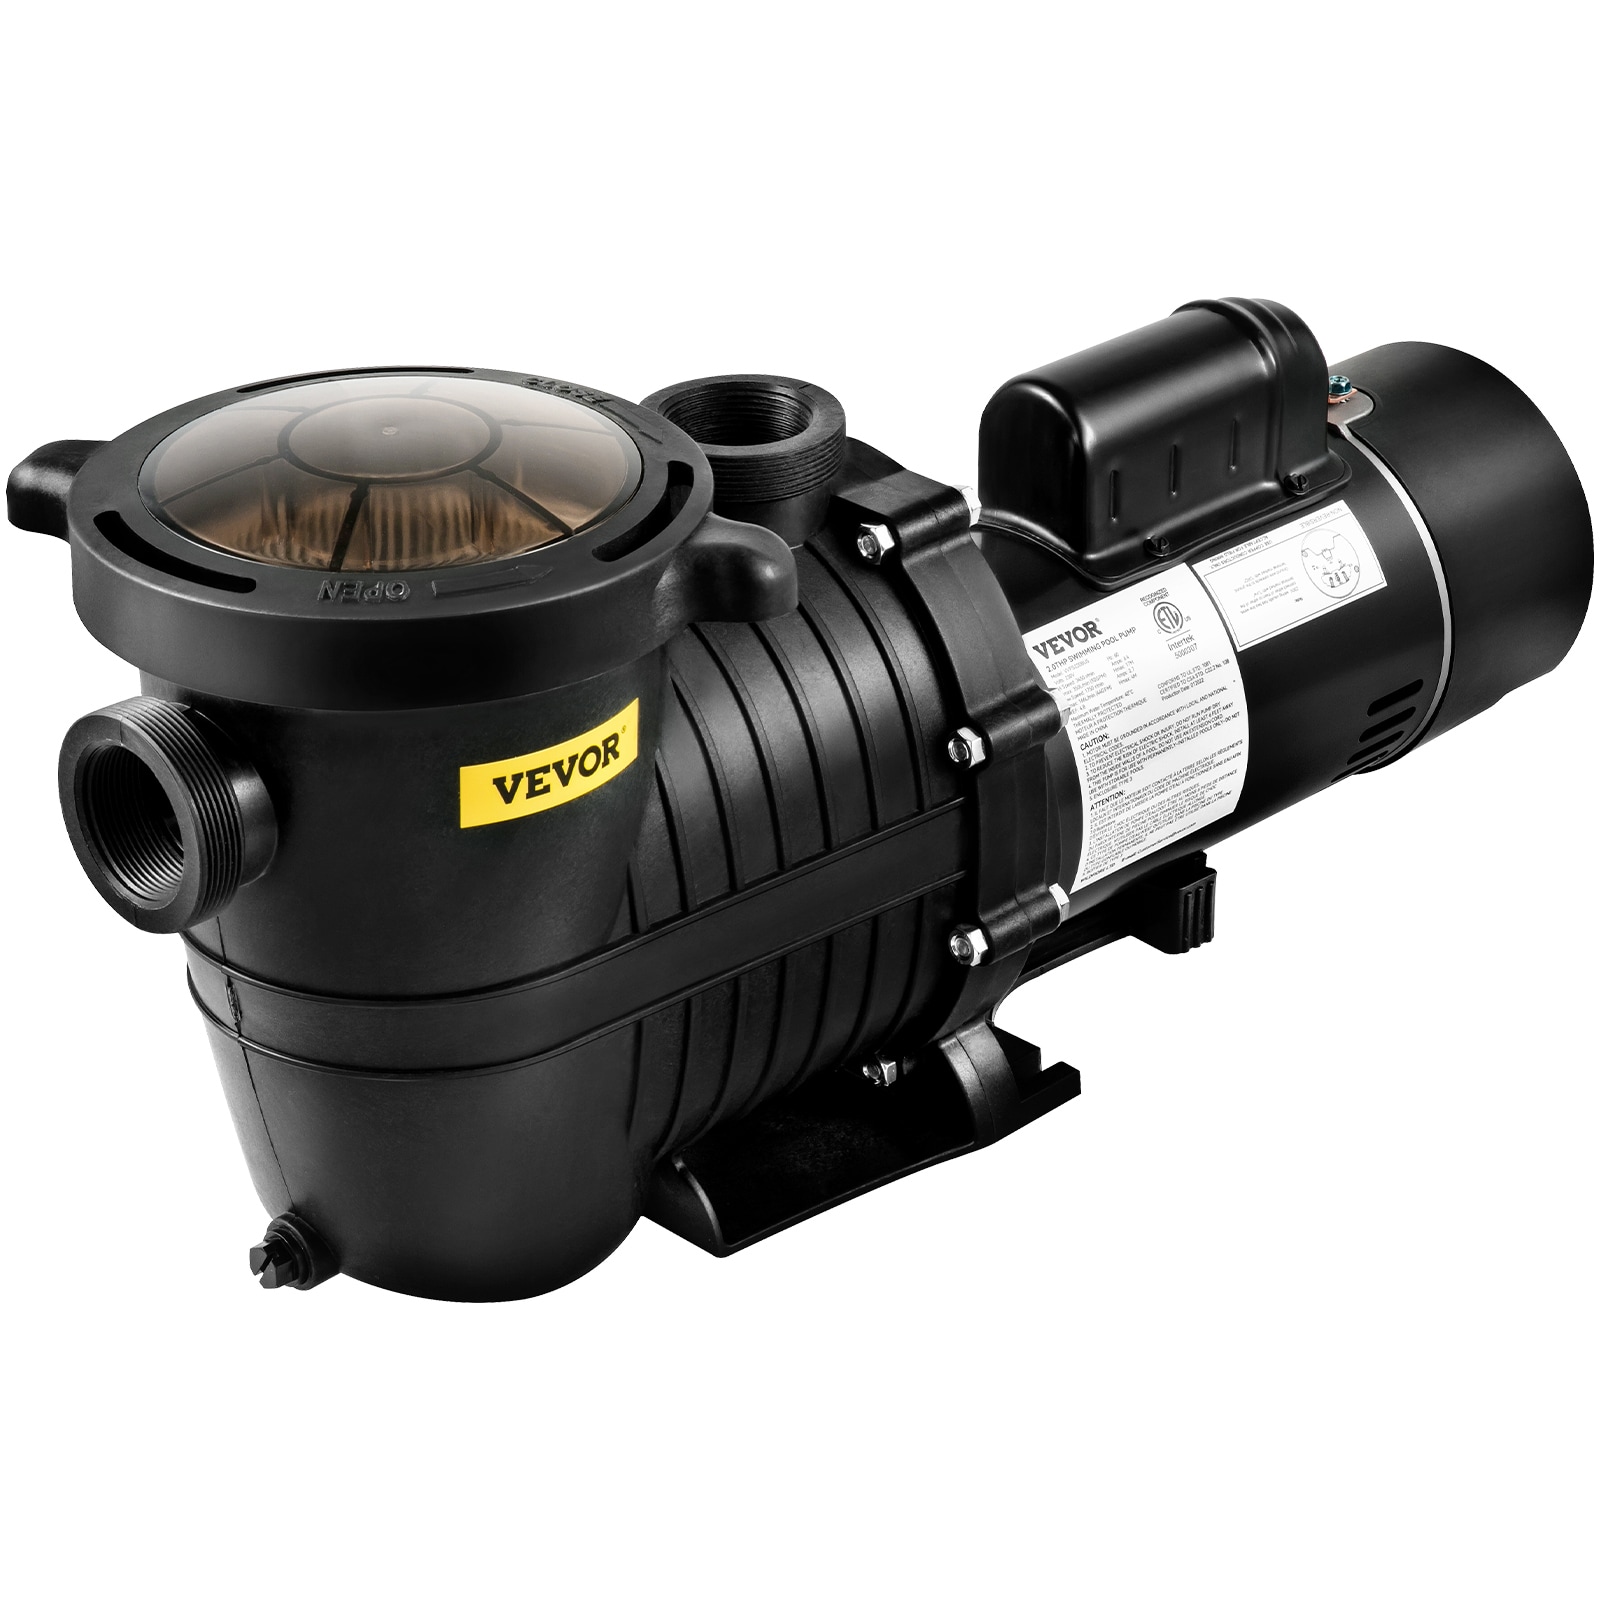 VEVOR Swimming Pool Pump 230V 1.5-HP Pool in the Pool Pumps department at Lowes.com